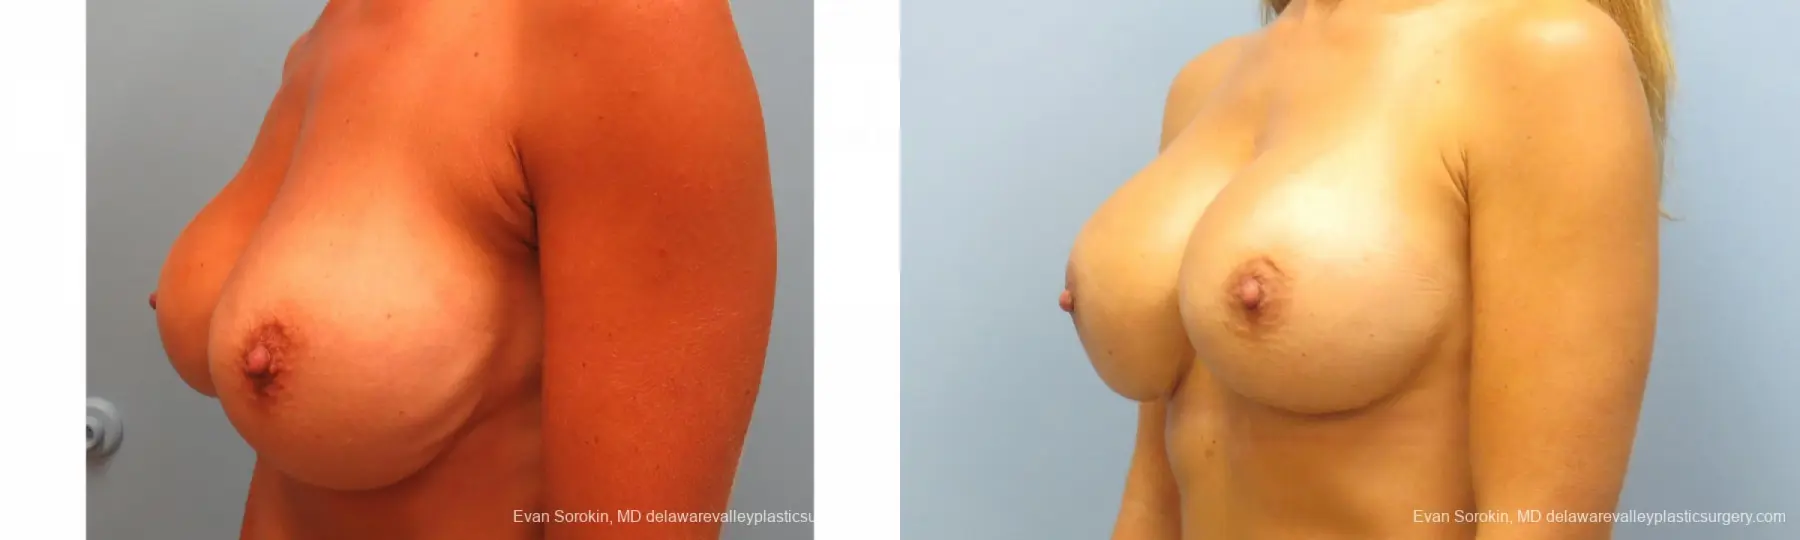 Breast Augmentation Revision: Patient 10 - Before and After 2